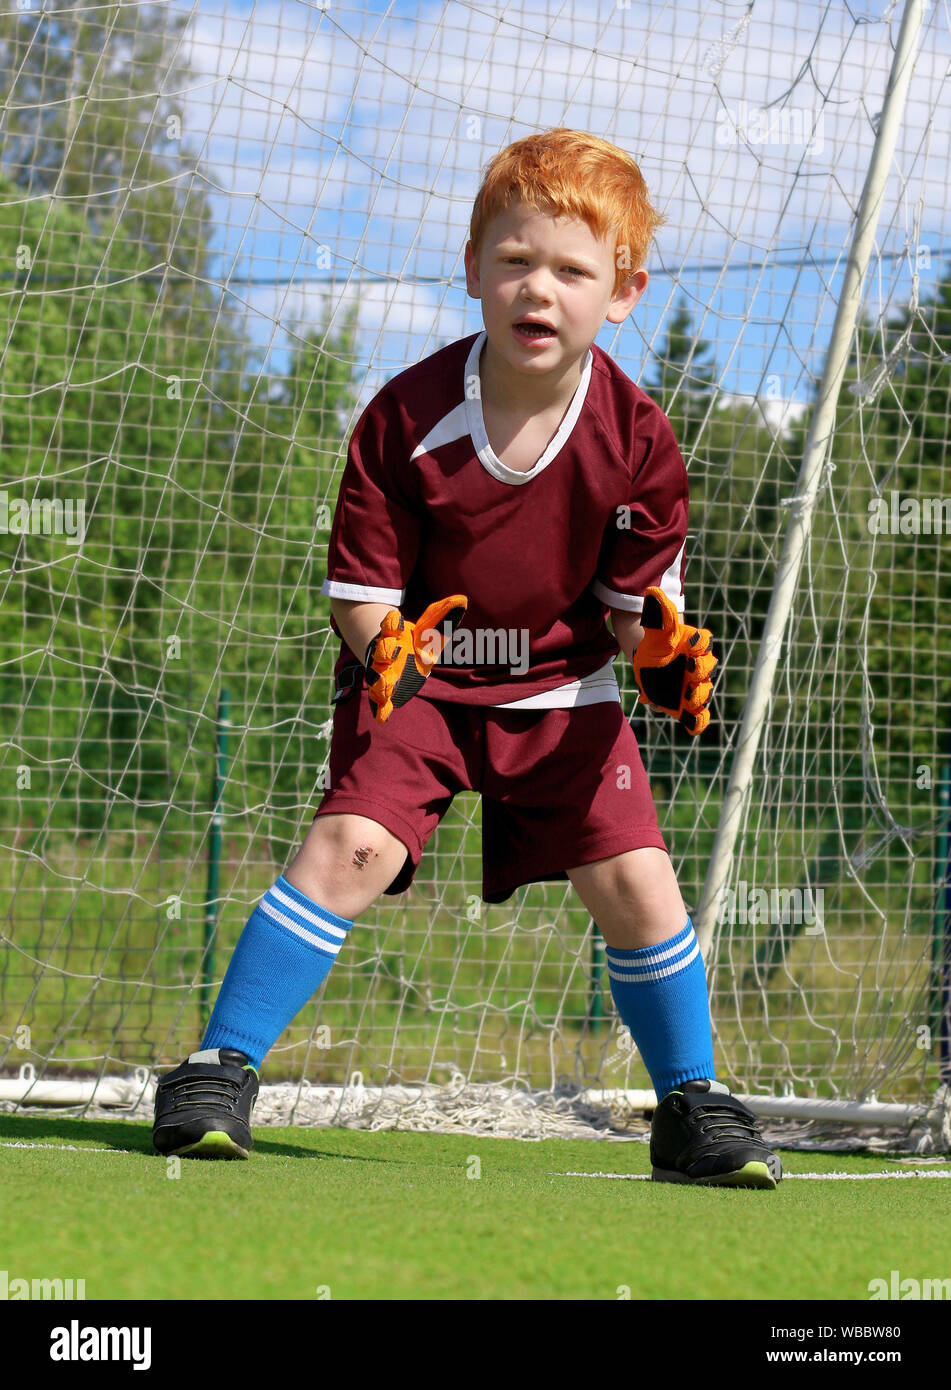 Goalkeeper kid is waiting to catch a ball from a penalty kick on a soccer stadium. Cheerful little boy with ginger hair. Footballer in sports clothes Stock Photo